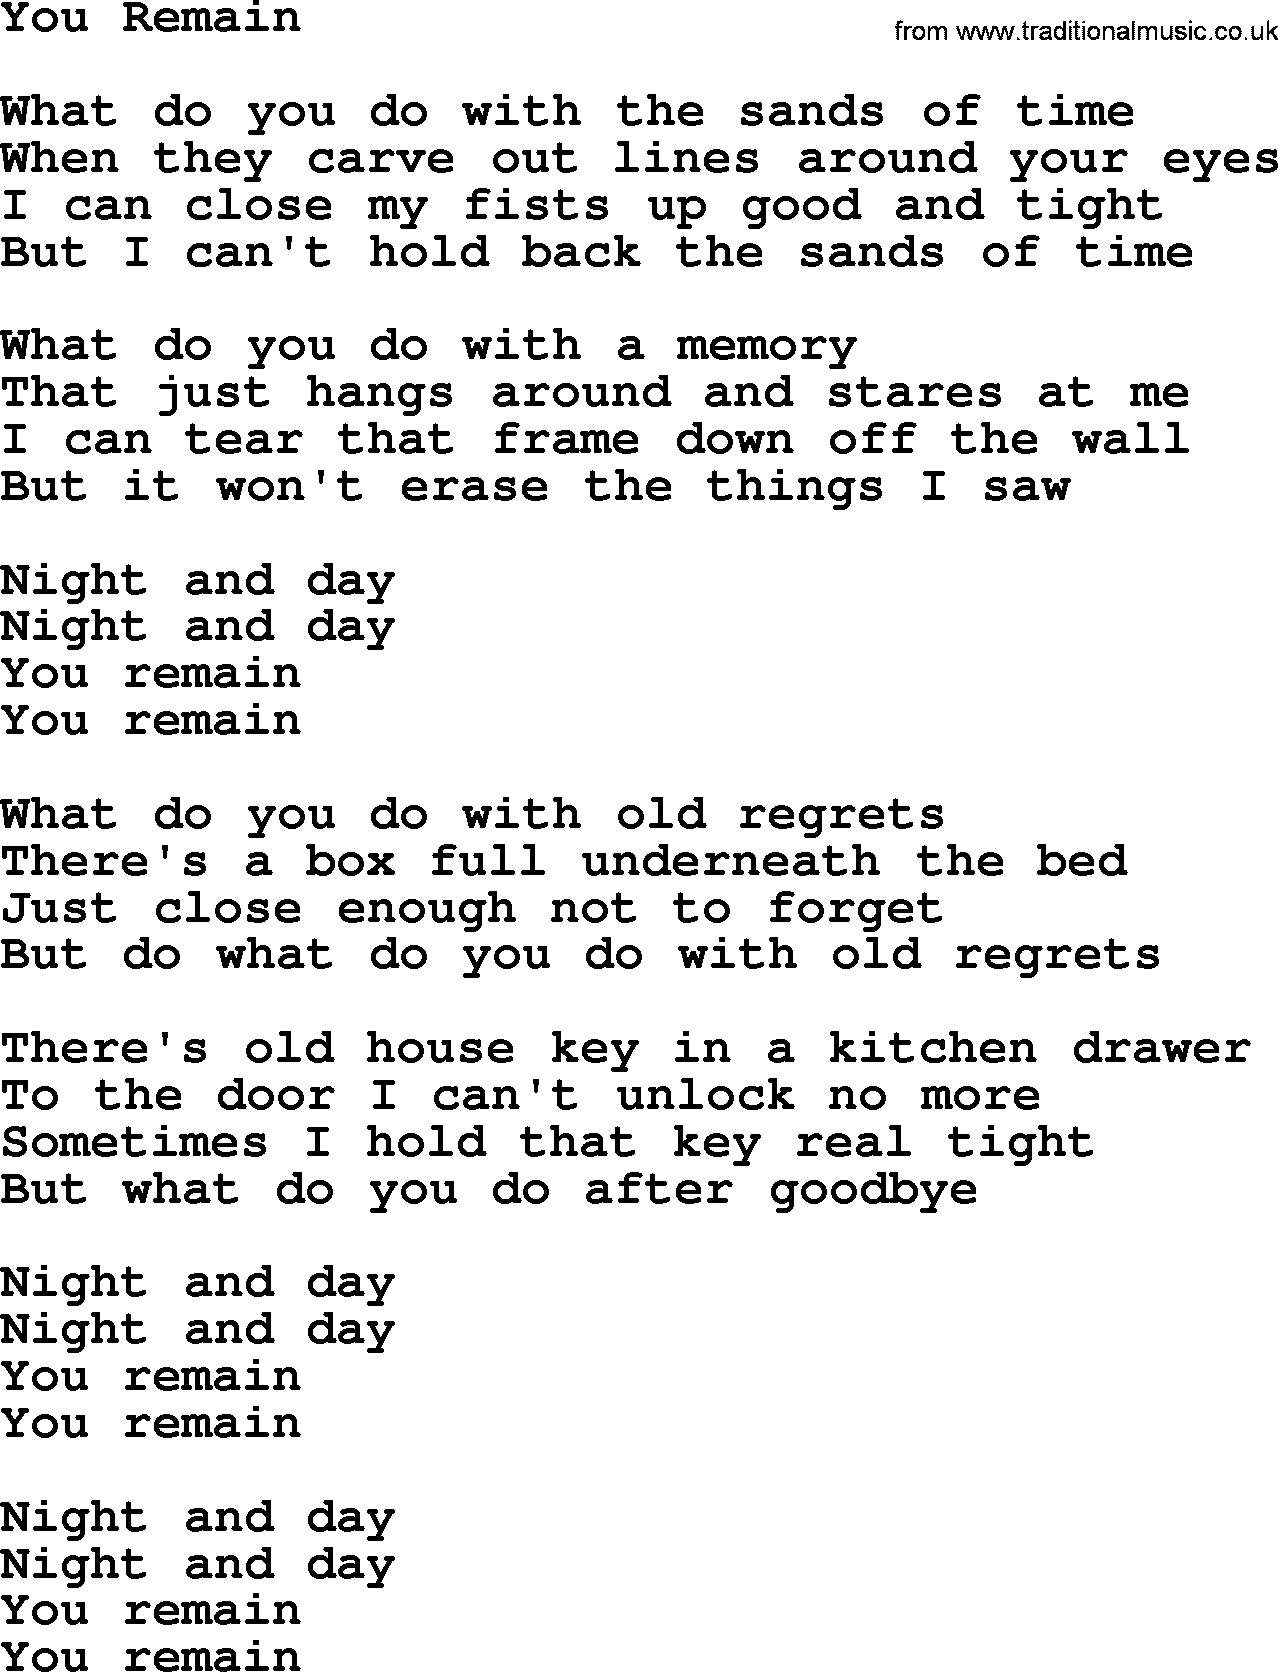 Willie Nelson song: You Remain lyrics